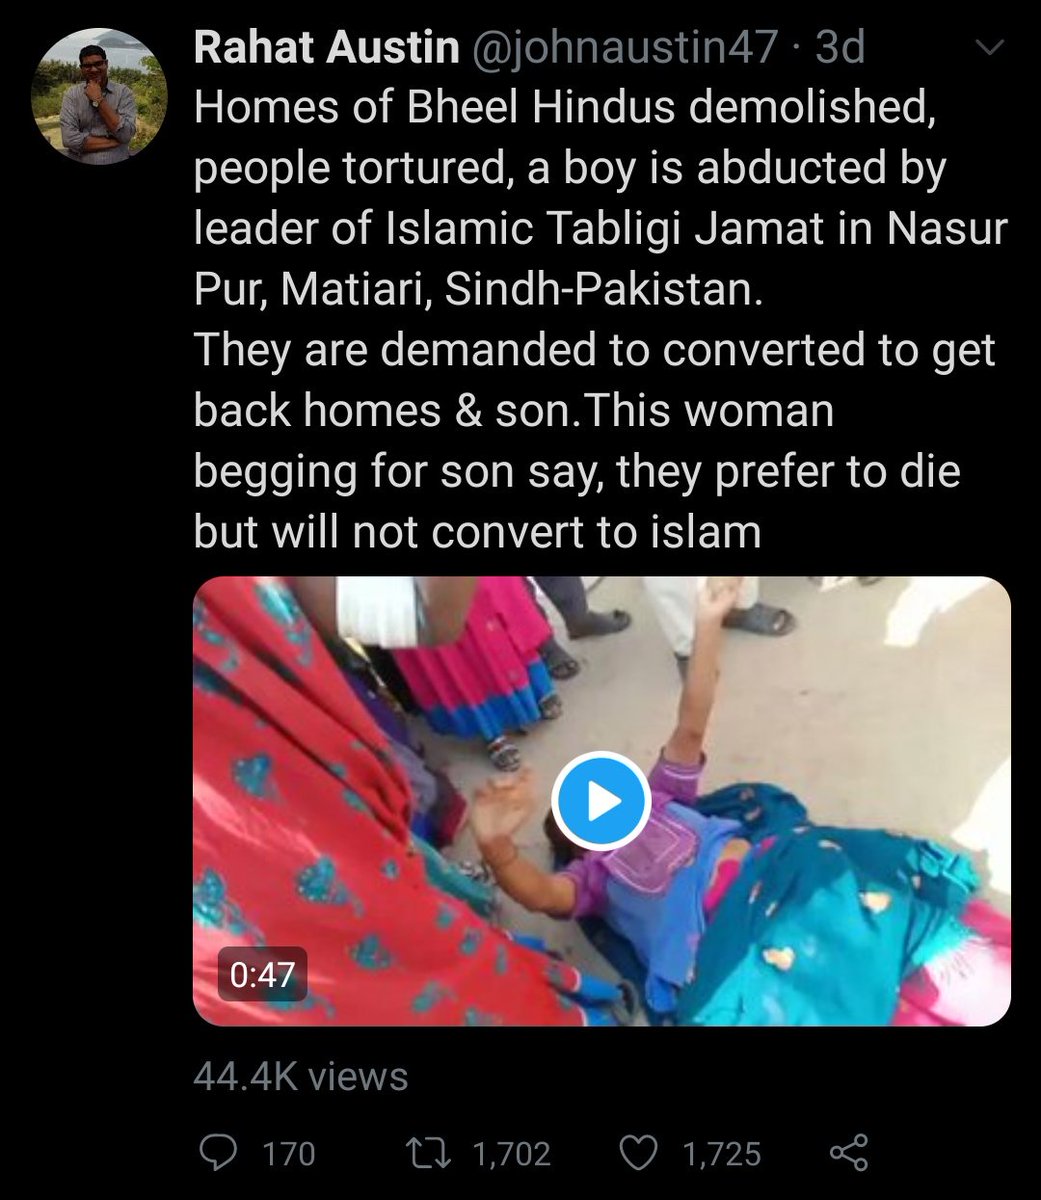 ..but if she is given refuge here that'll be a "danger" to secularism.Follow  @johnaustin47 & see the state of Hindus in Pakistan. Mian Mithu is shielded by Imran Khan & Bajwa himself.